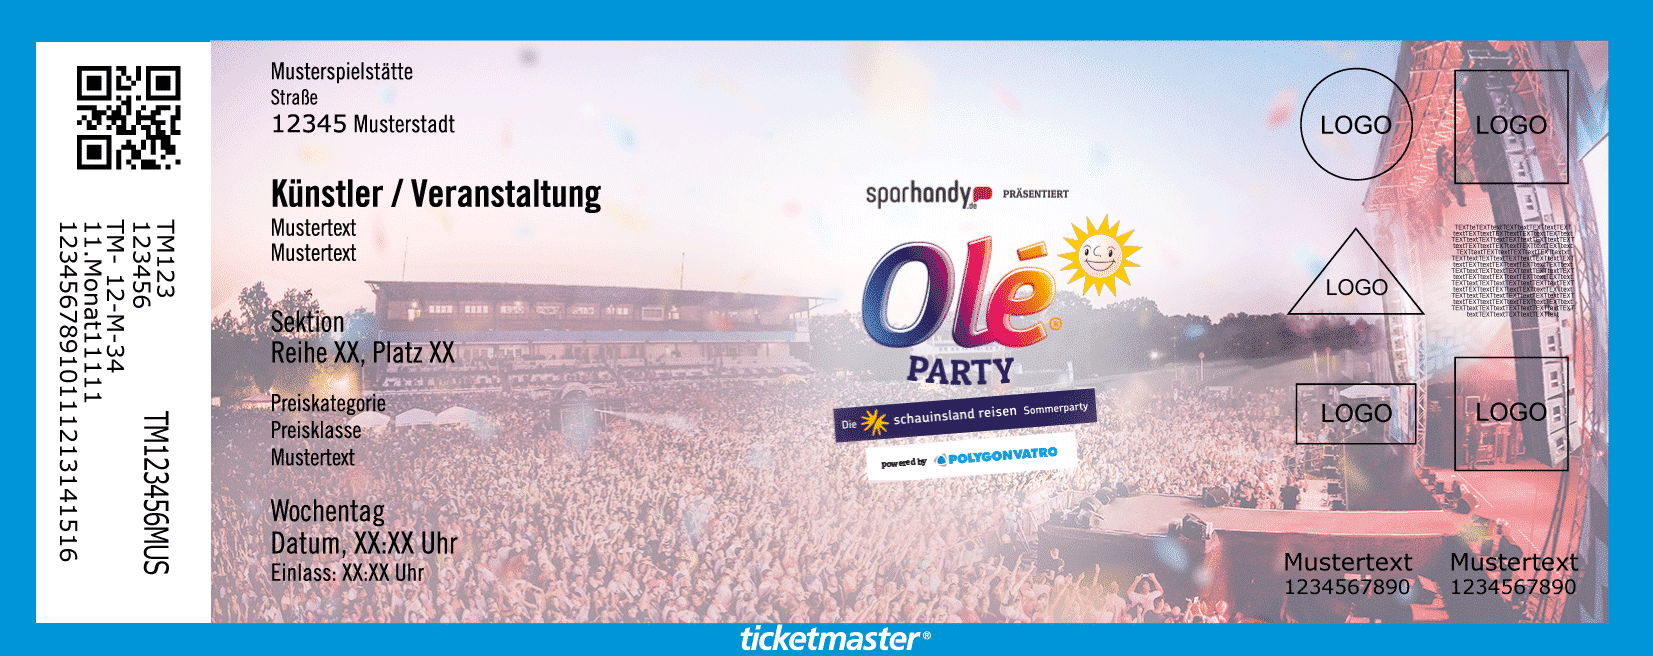 Ole Party 2020 Tour Tickets